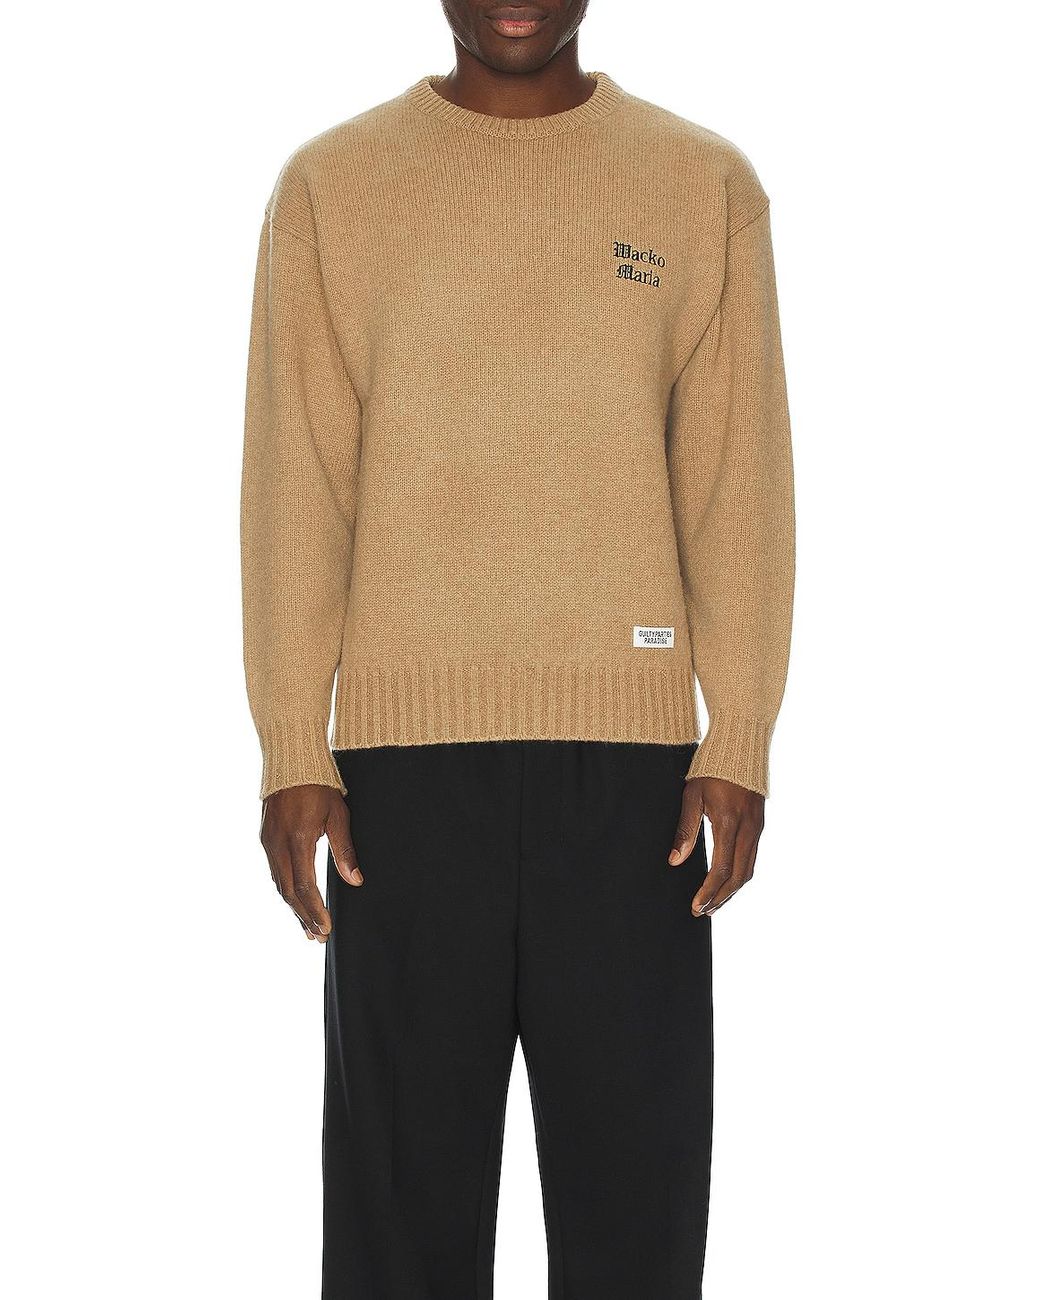 Wacko Maria Classic Crew Neck Sweater in Natural for Men | Lyst